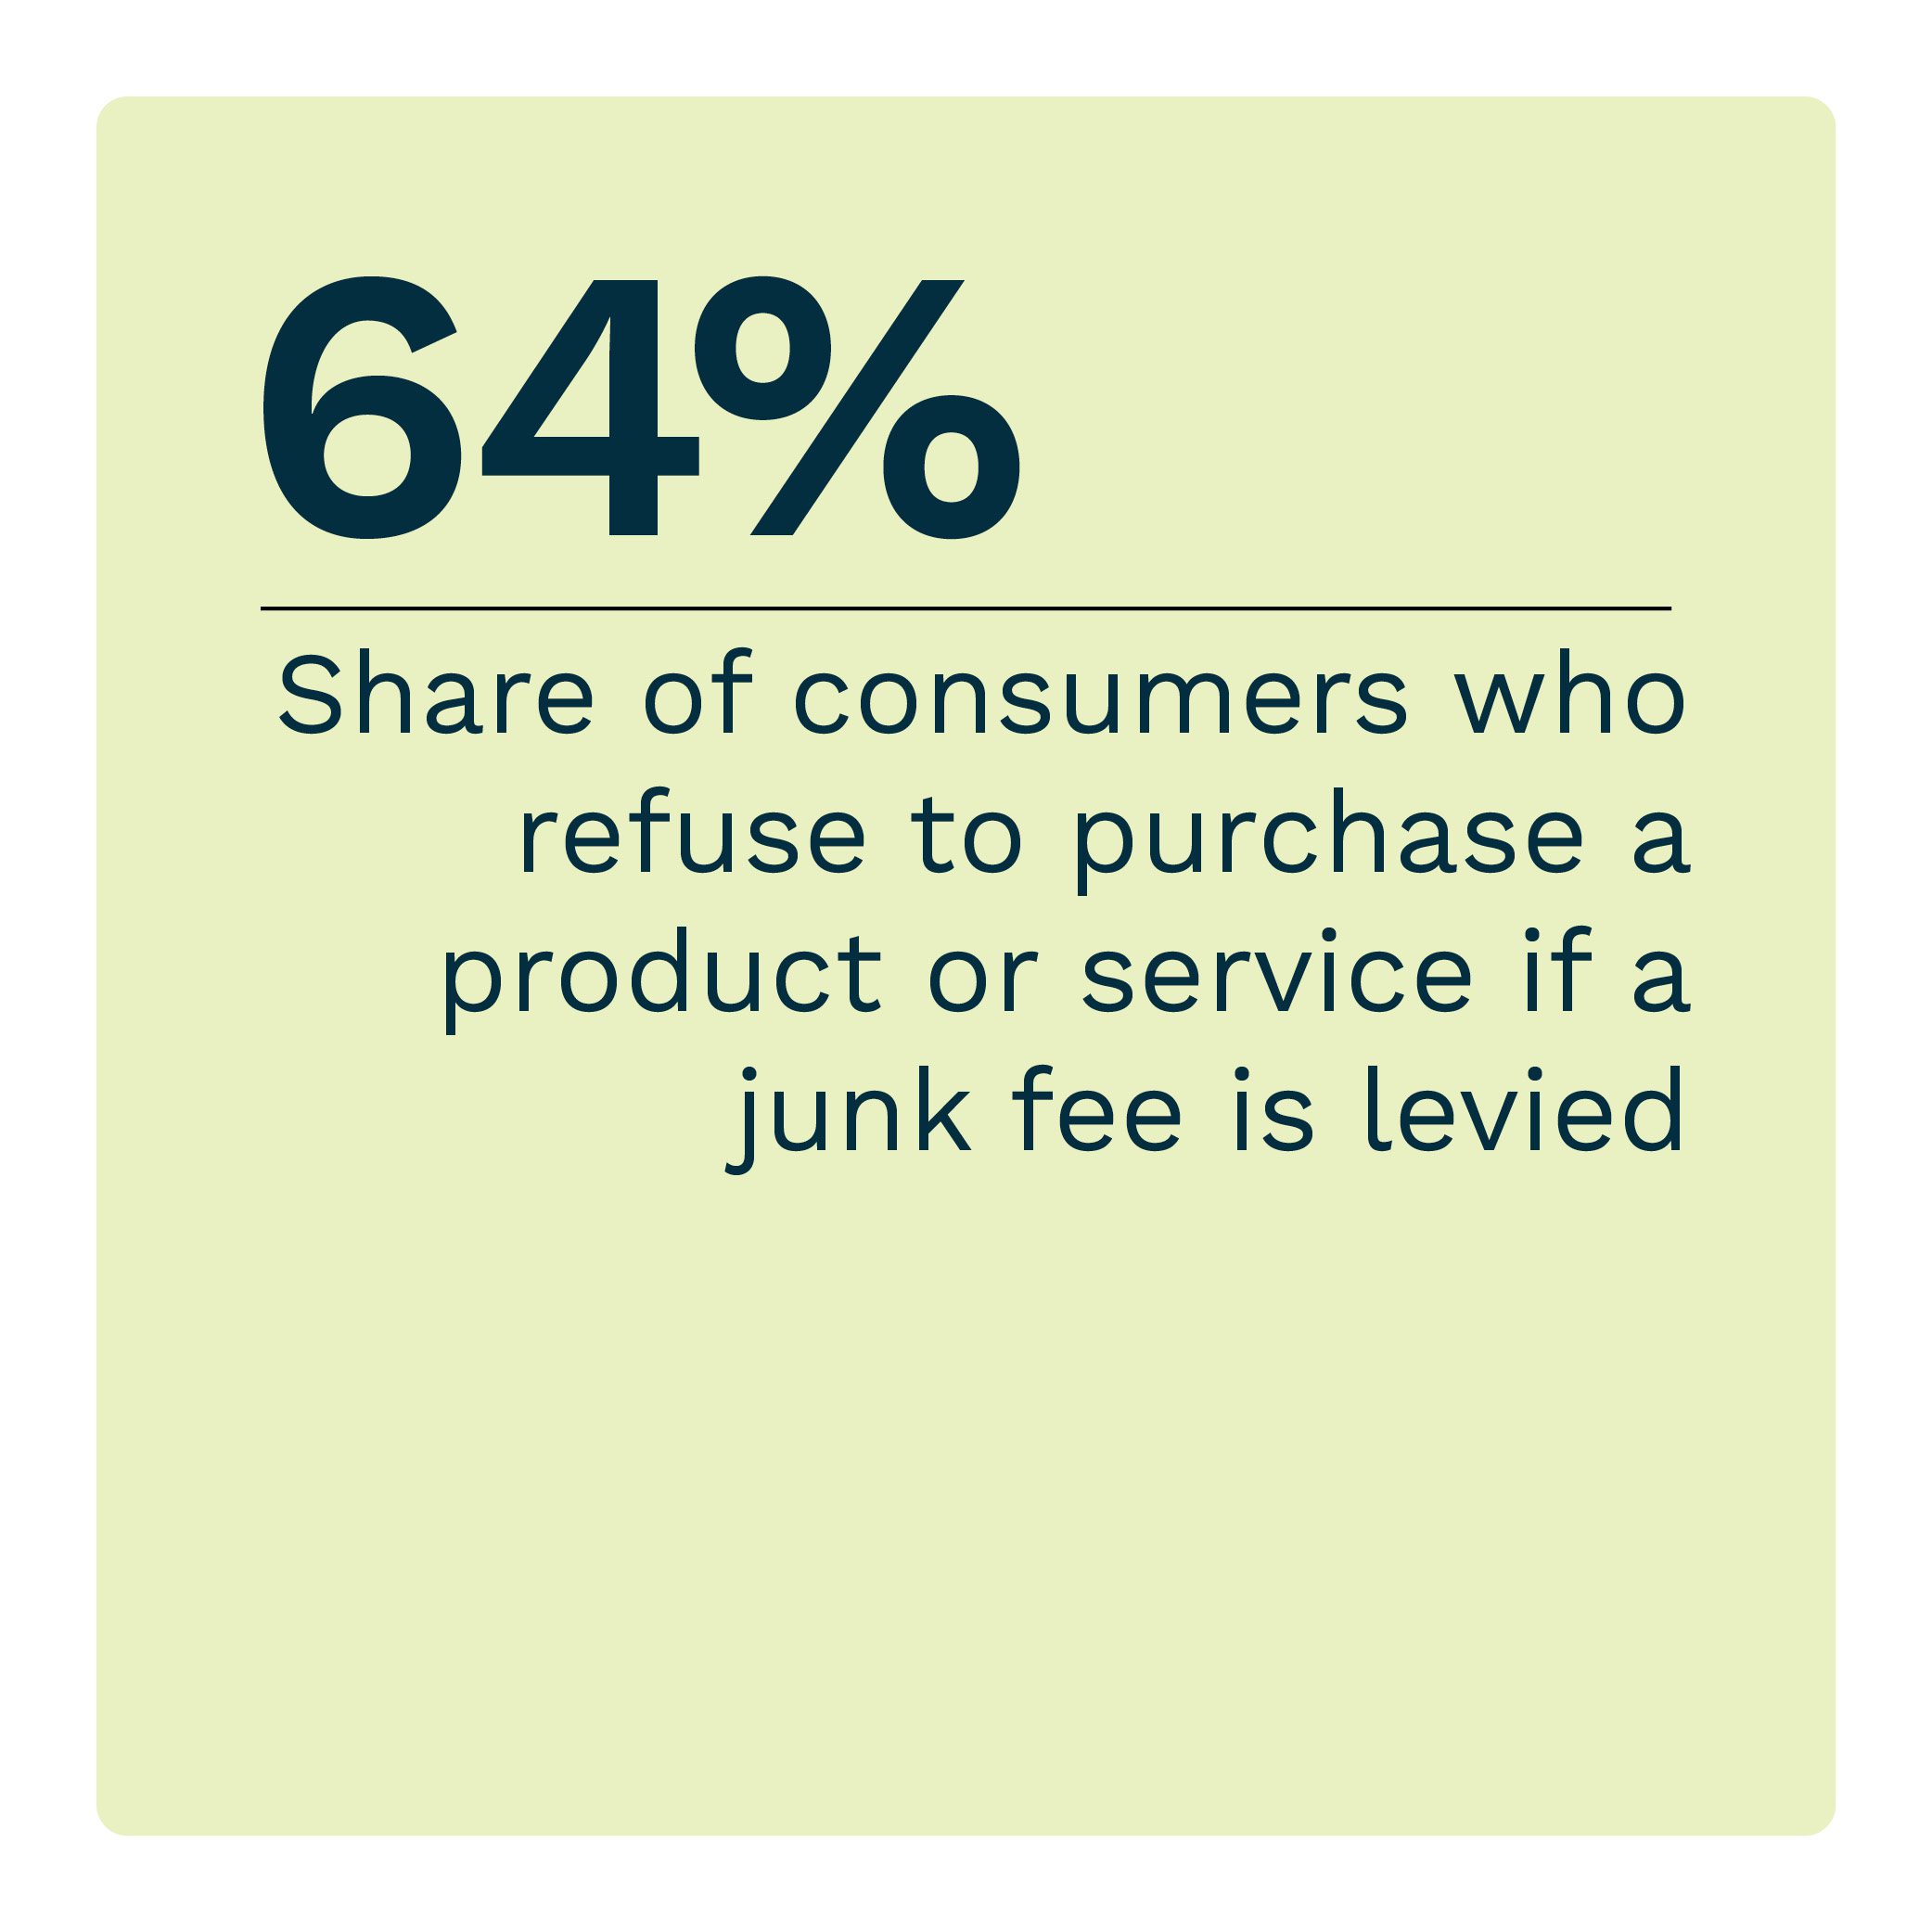 64%: Share of consumers who refuse to purchase a product or service if a junk fee is levied